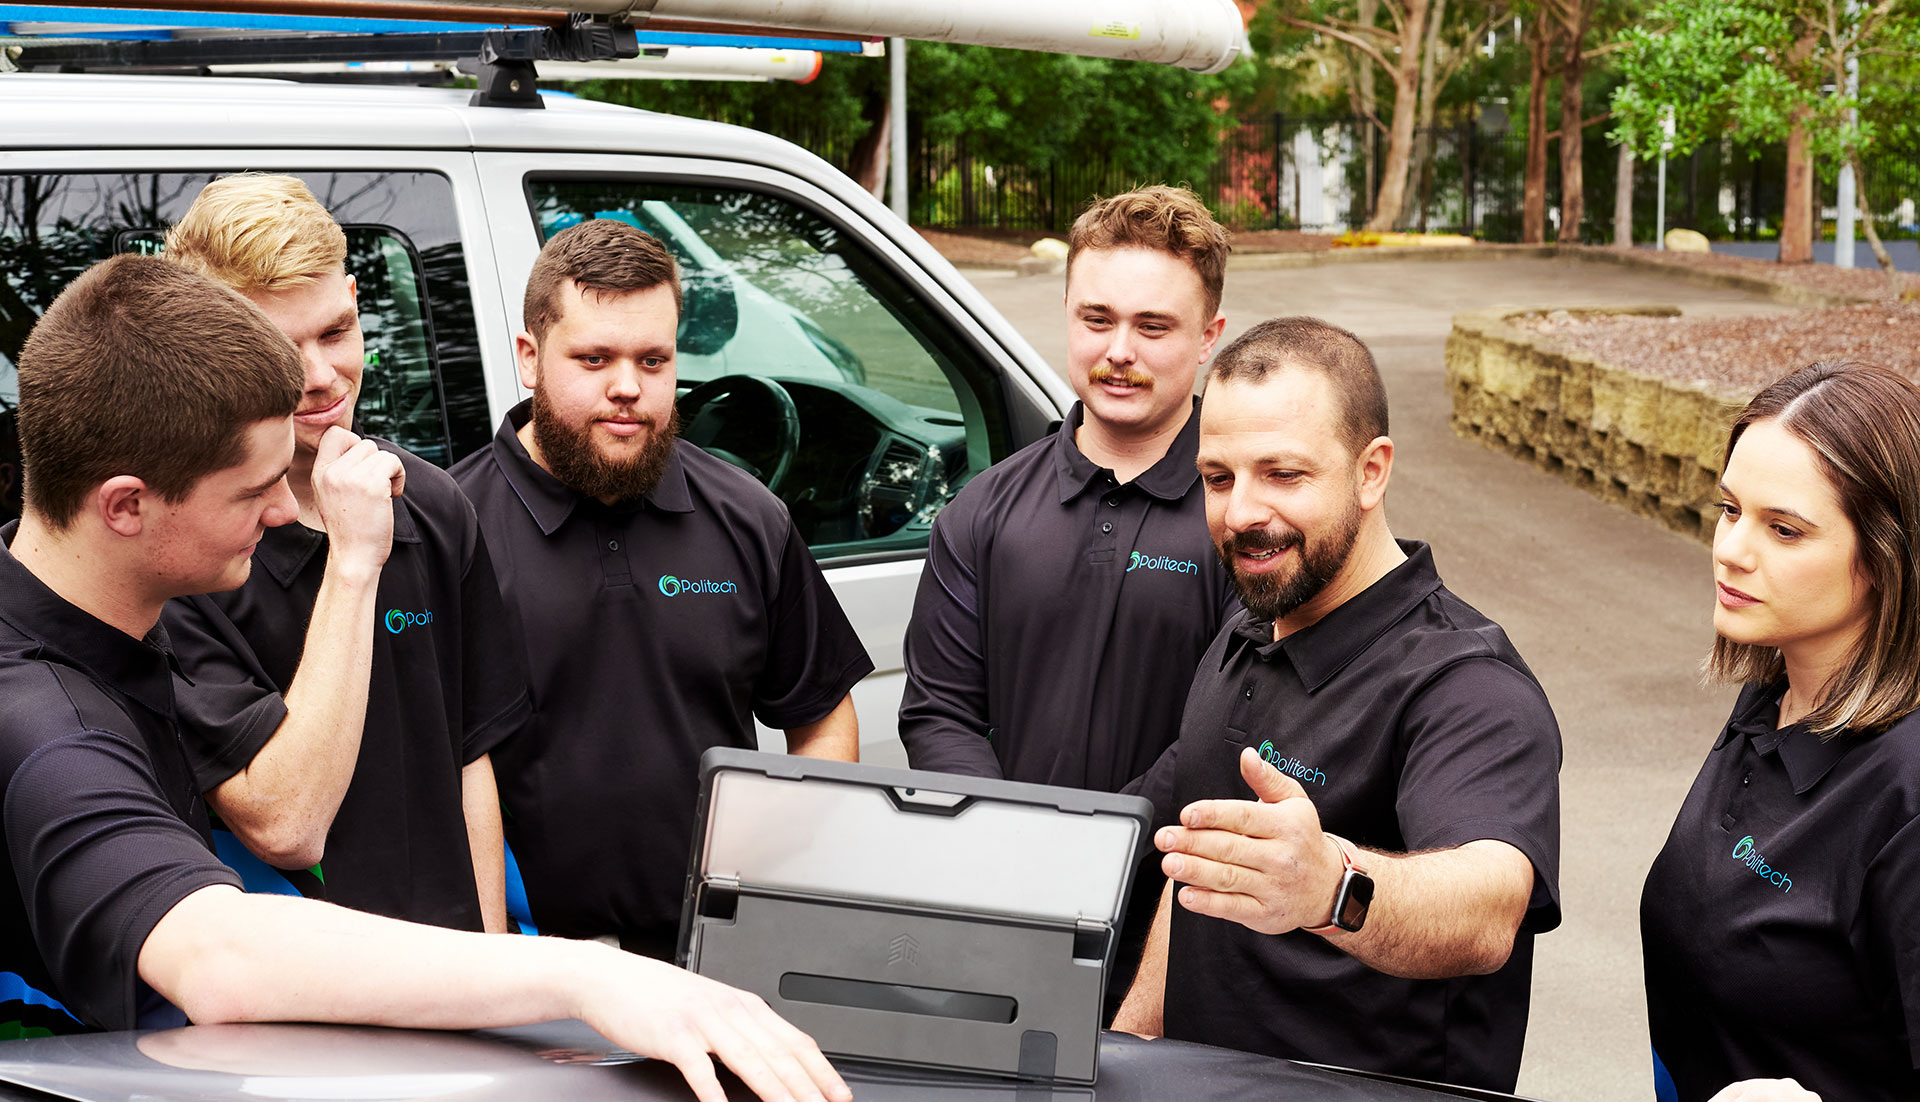 Leading Air Conditioning Service Company Sydney - Politech